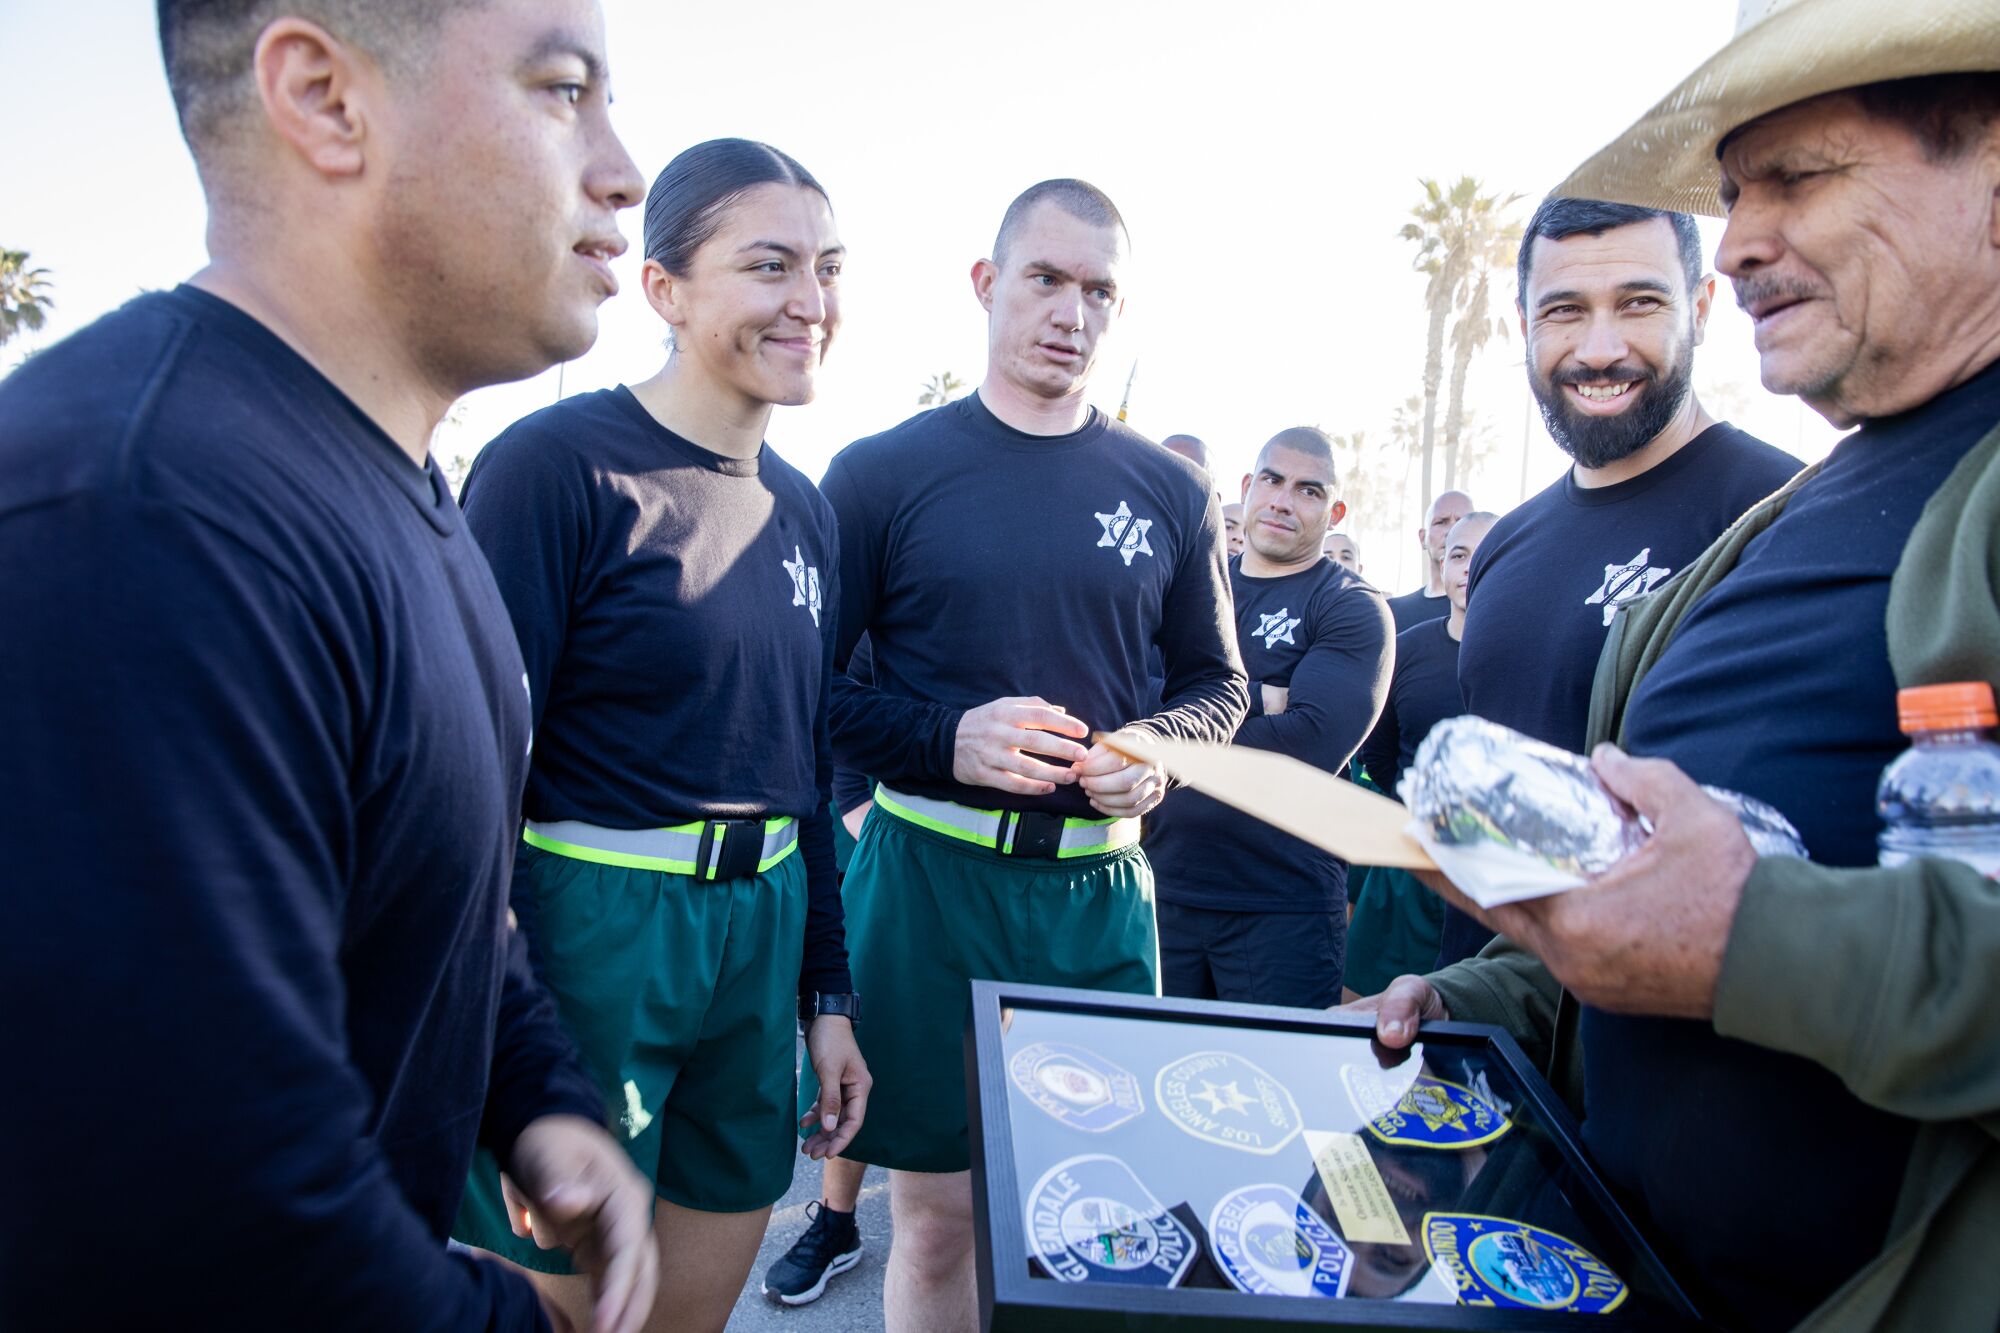 Recruits present a plaque to father and brother of fallen Monterey Park police officer Gardiel Solorio